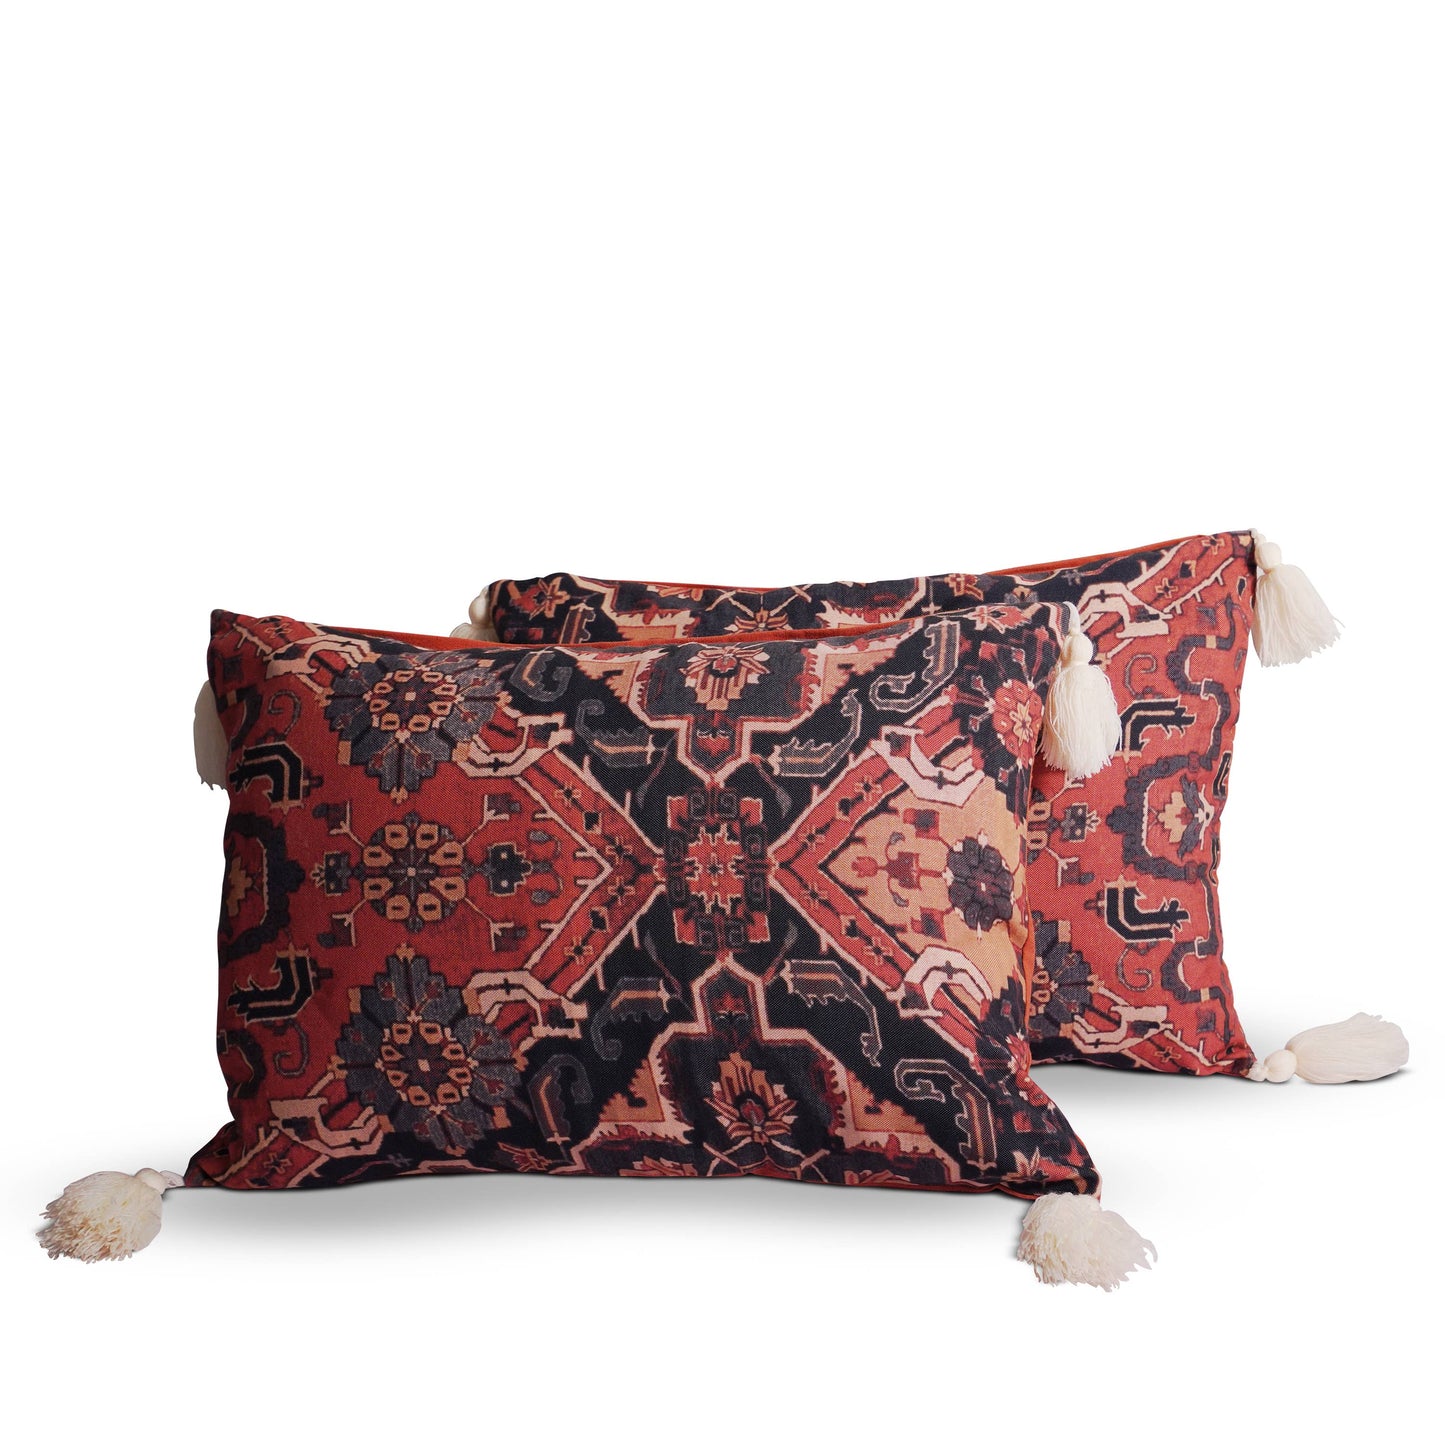 Black & Red Persian Design w/ Tassels Pillow Covers